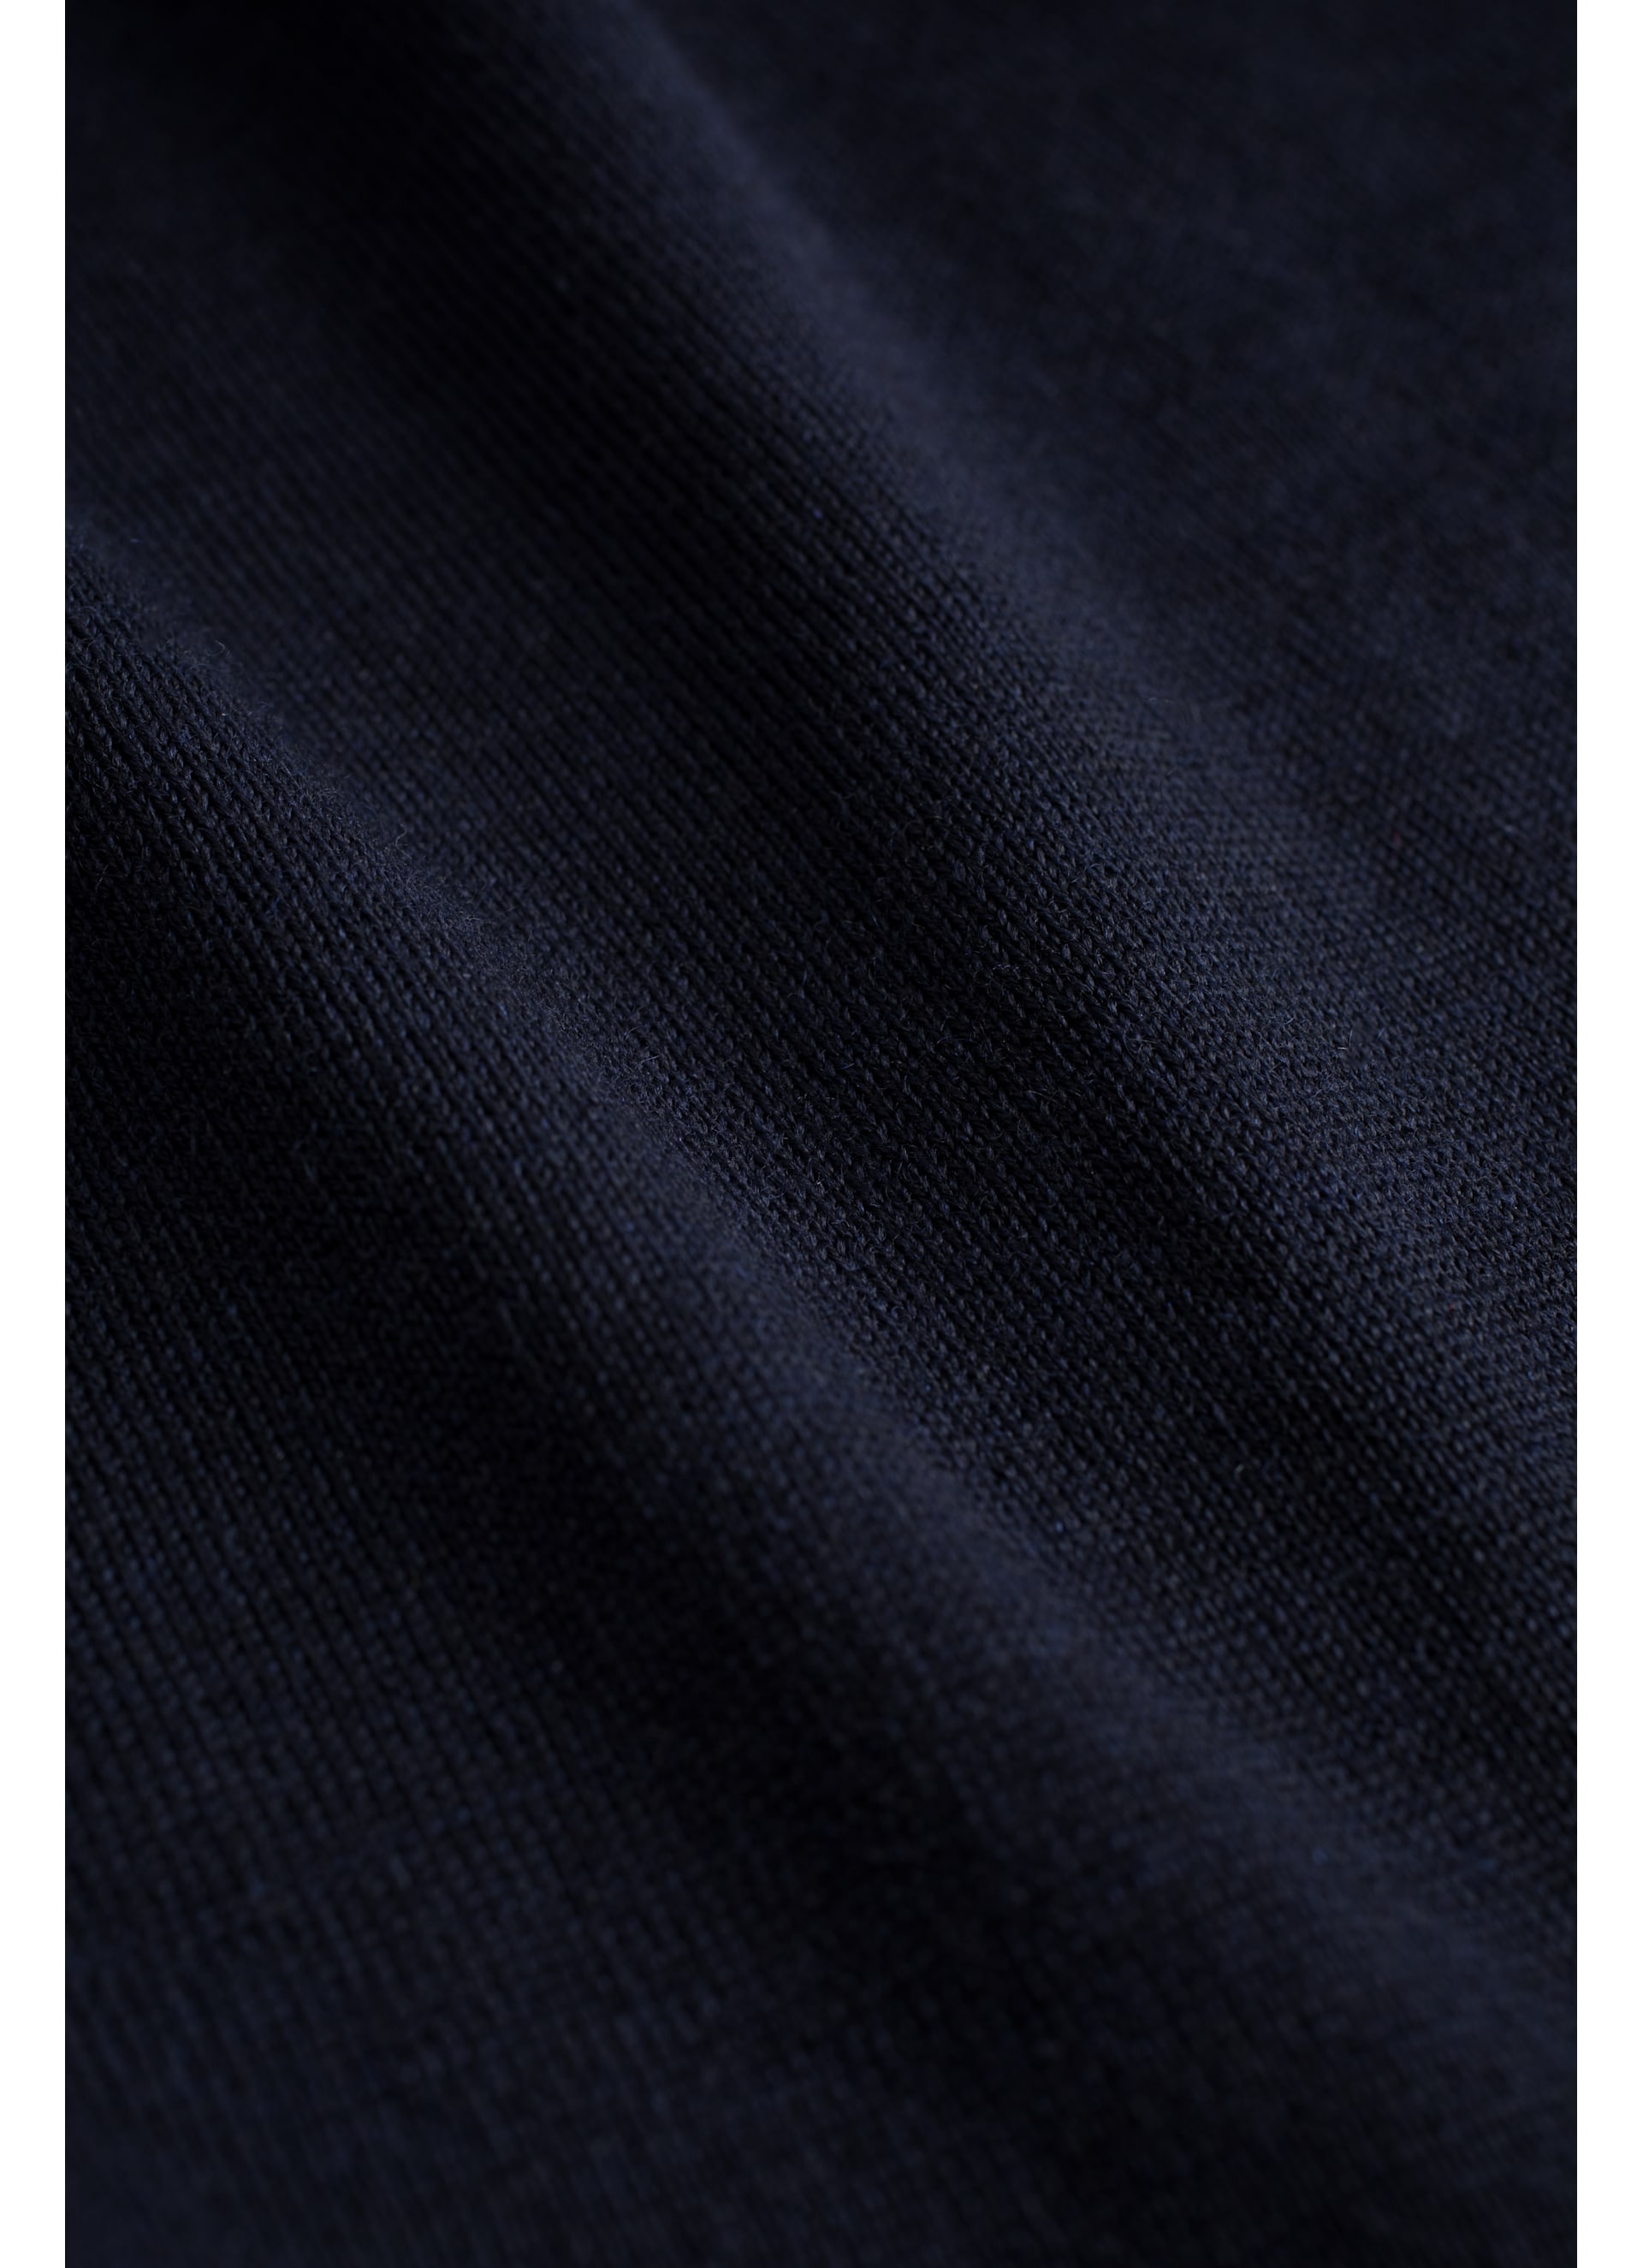 Navy Knitted T-shirt Sw821 | Suitsupply Online Store